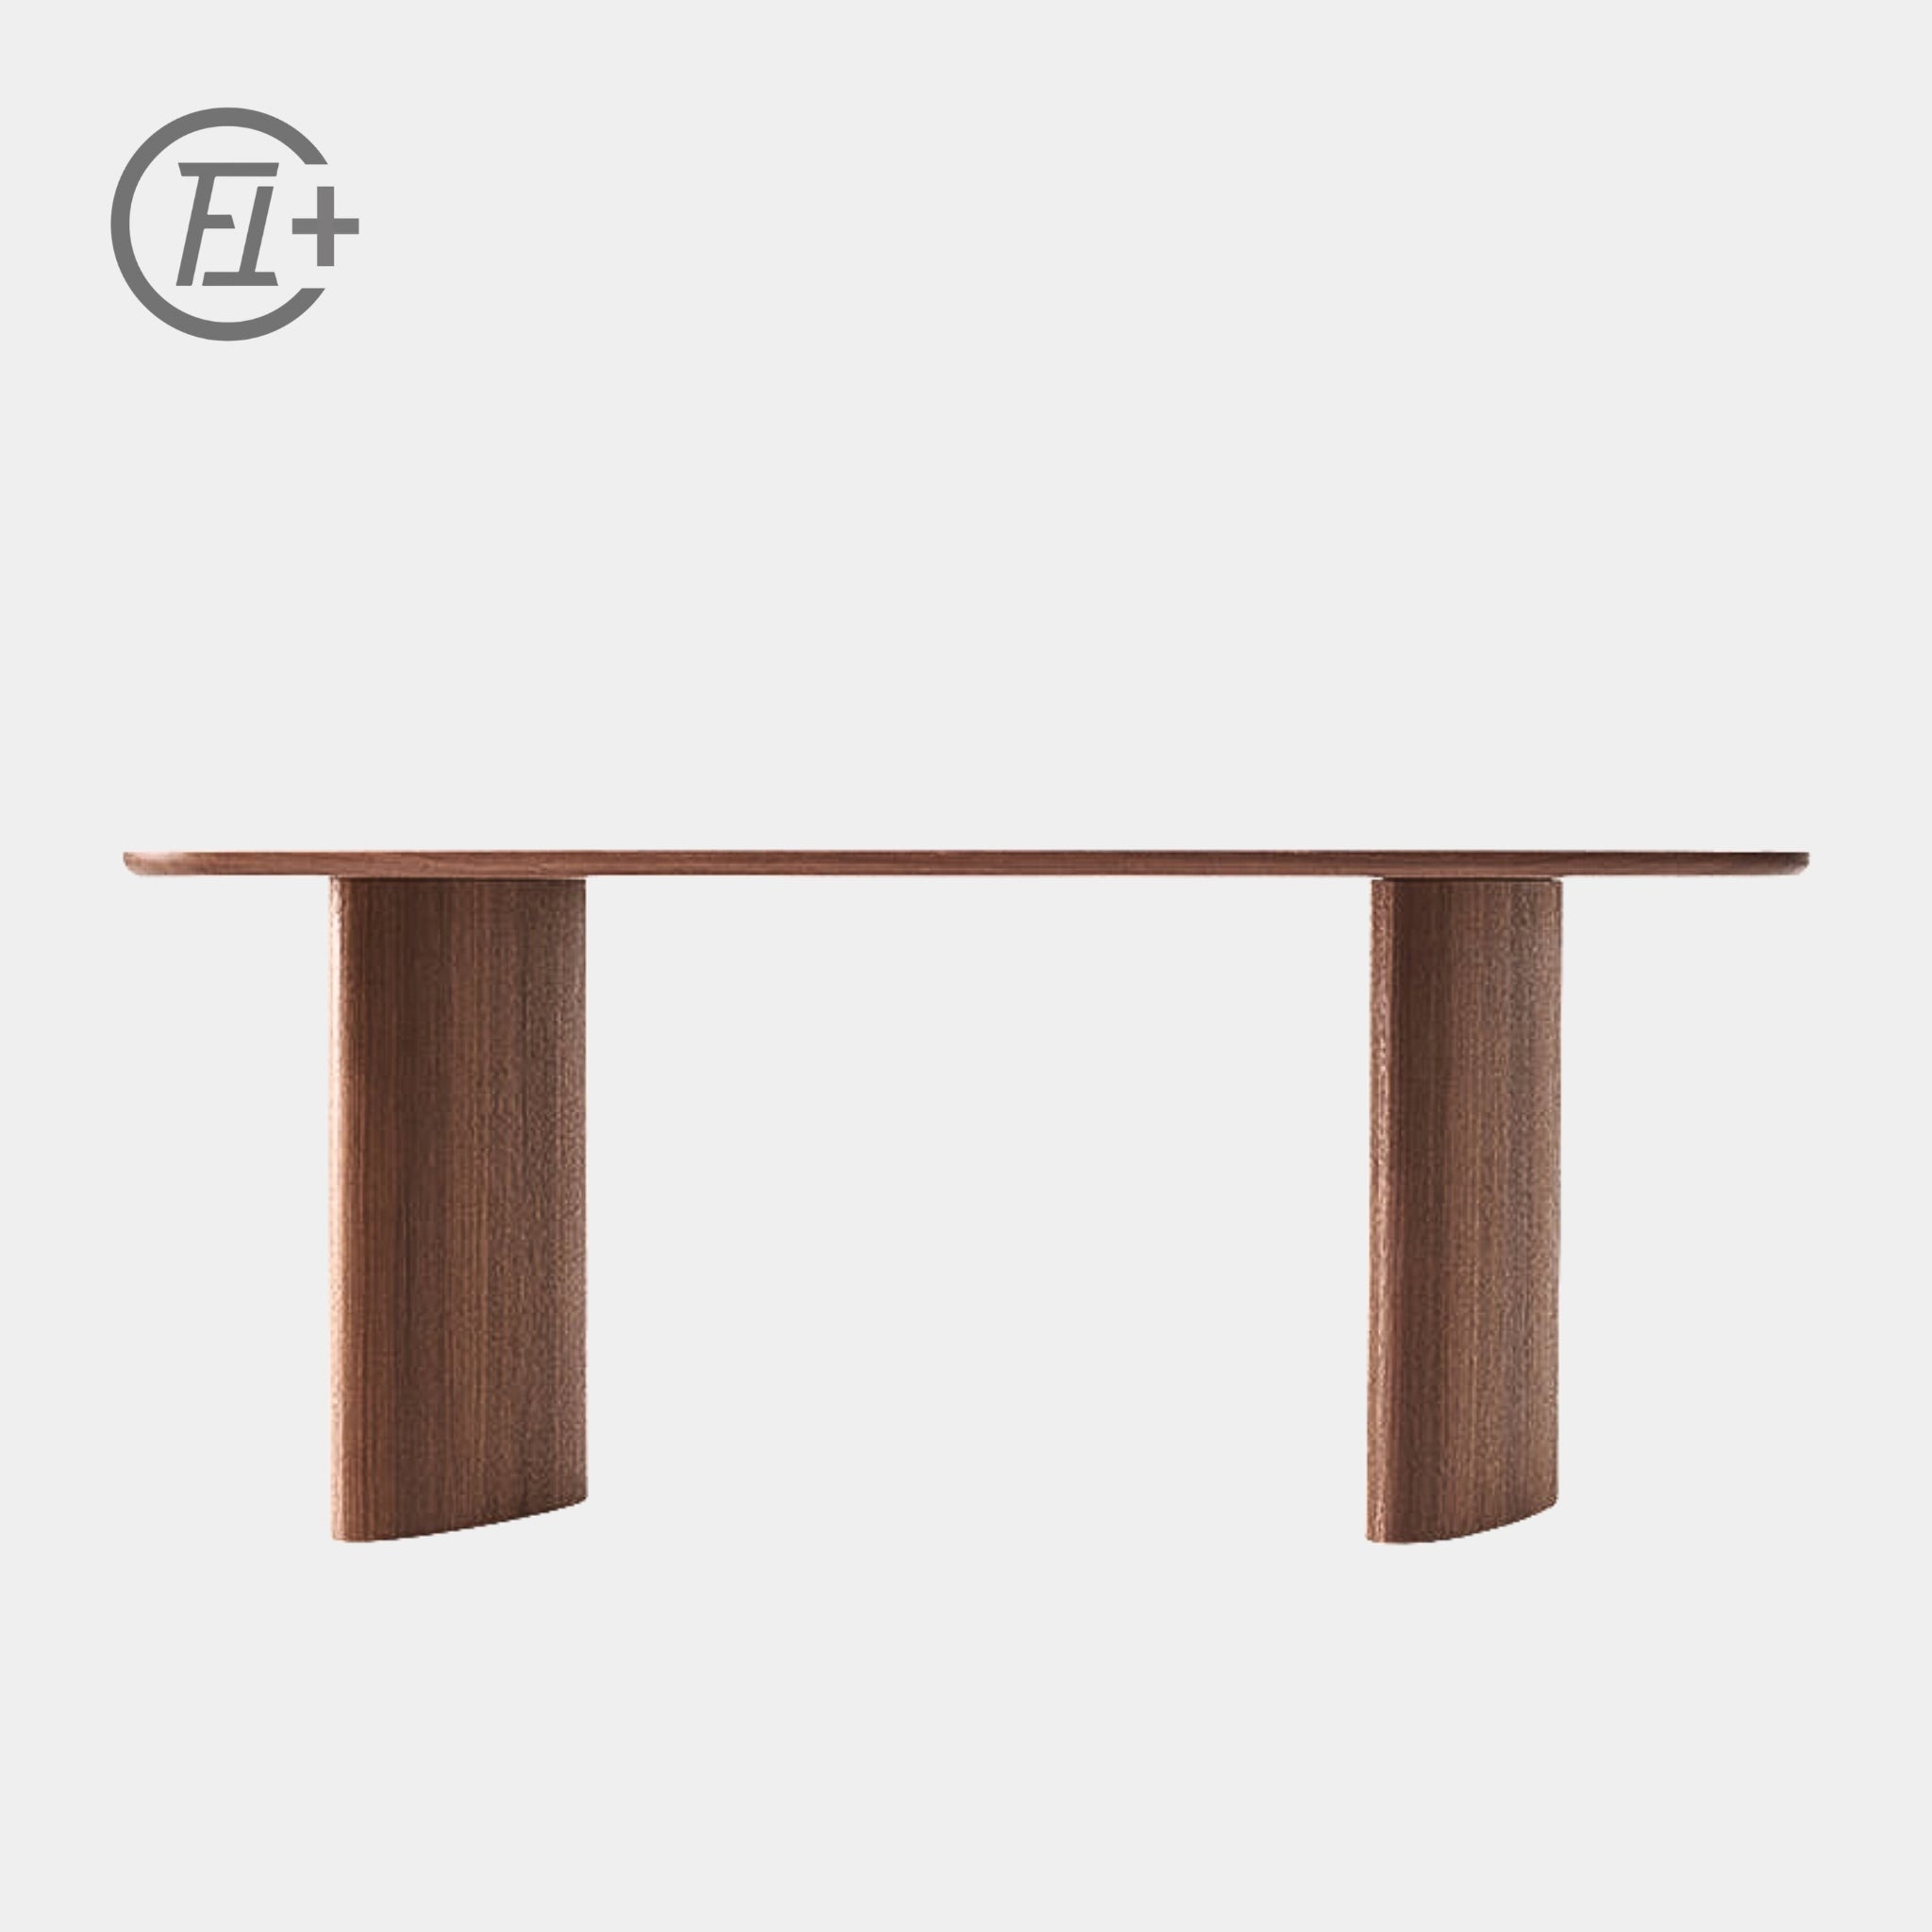 The Feelter Nemo Timber Dining Table